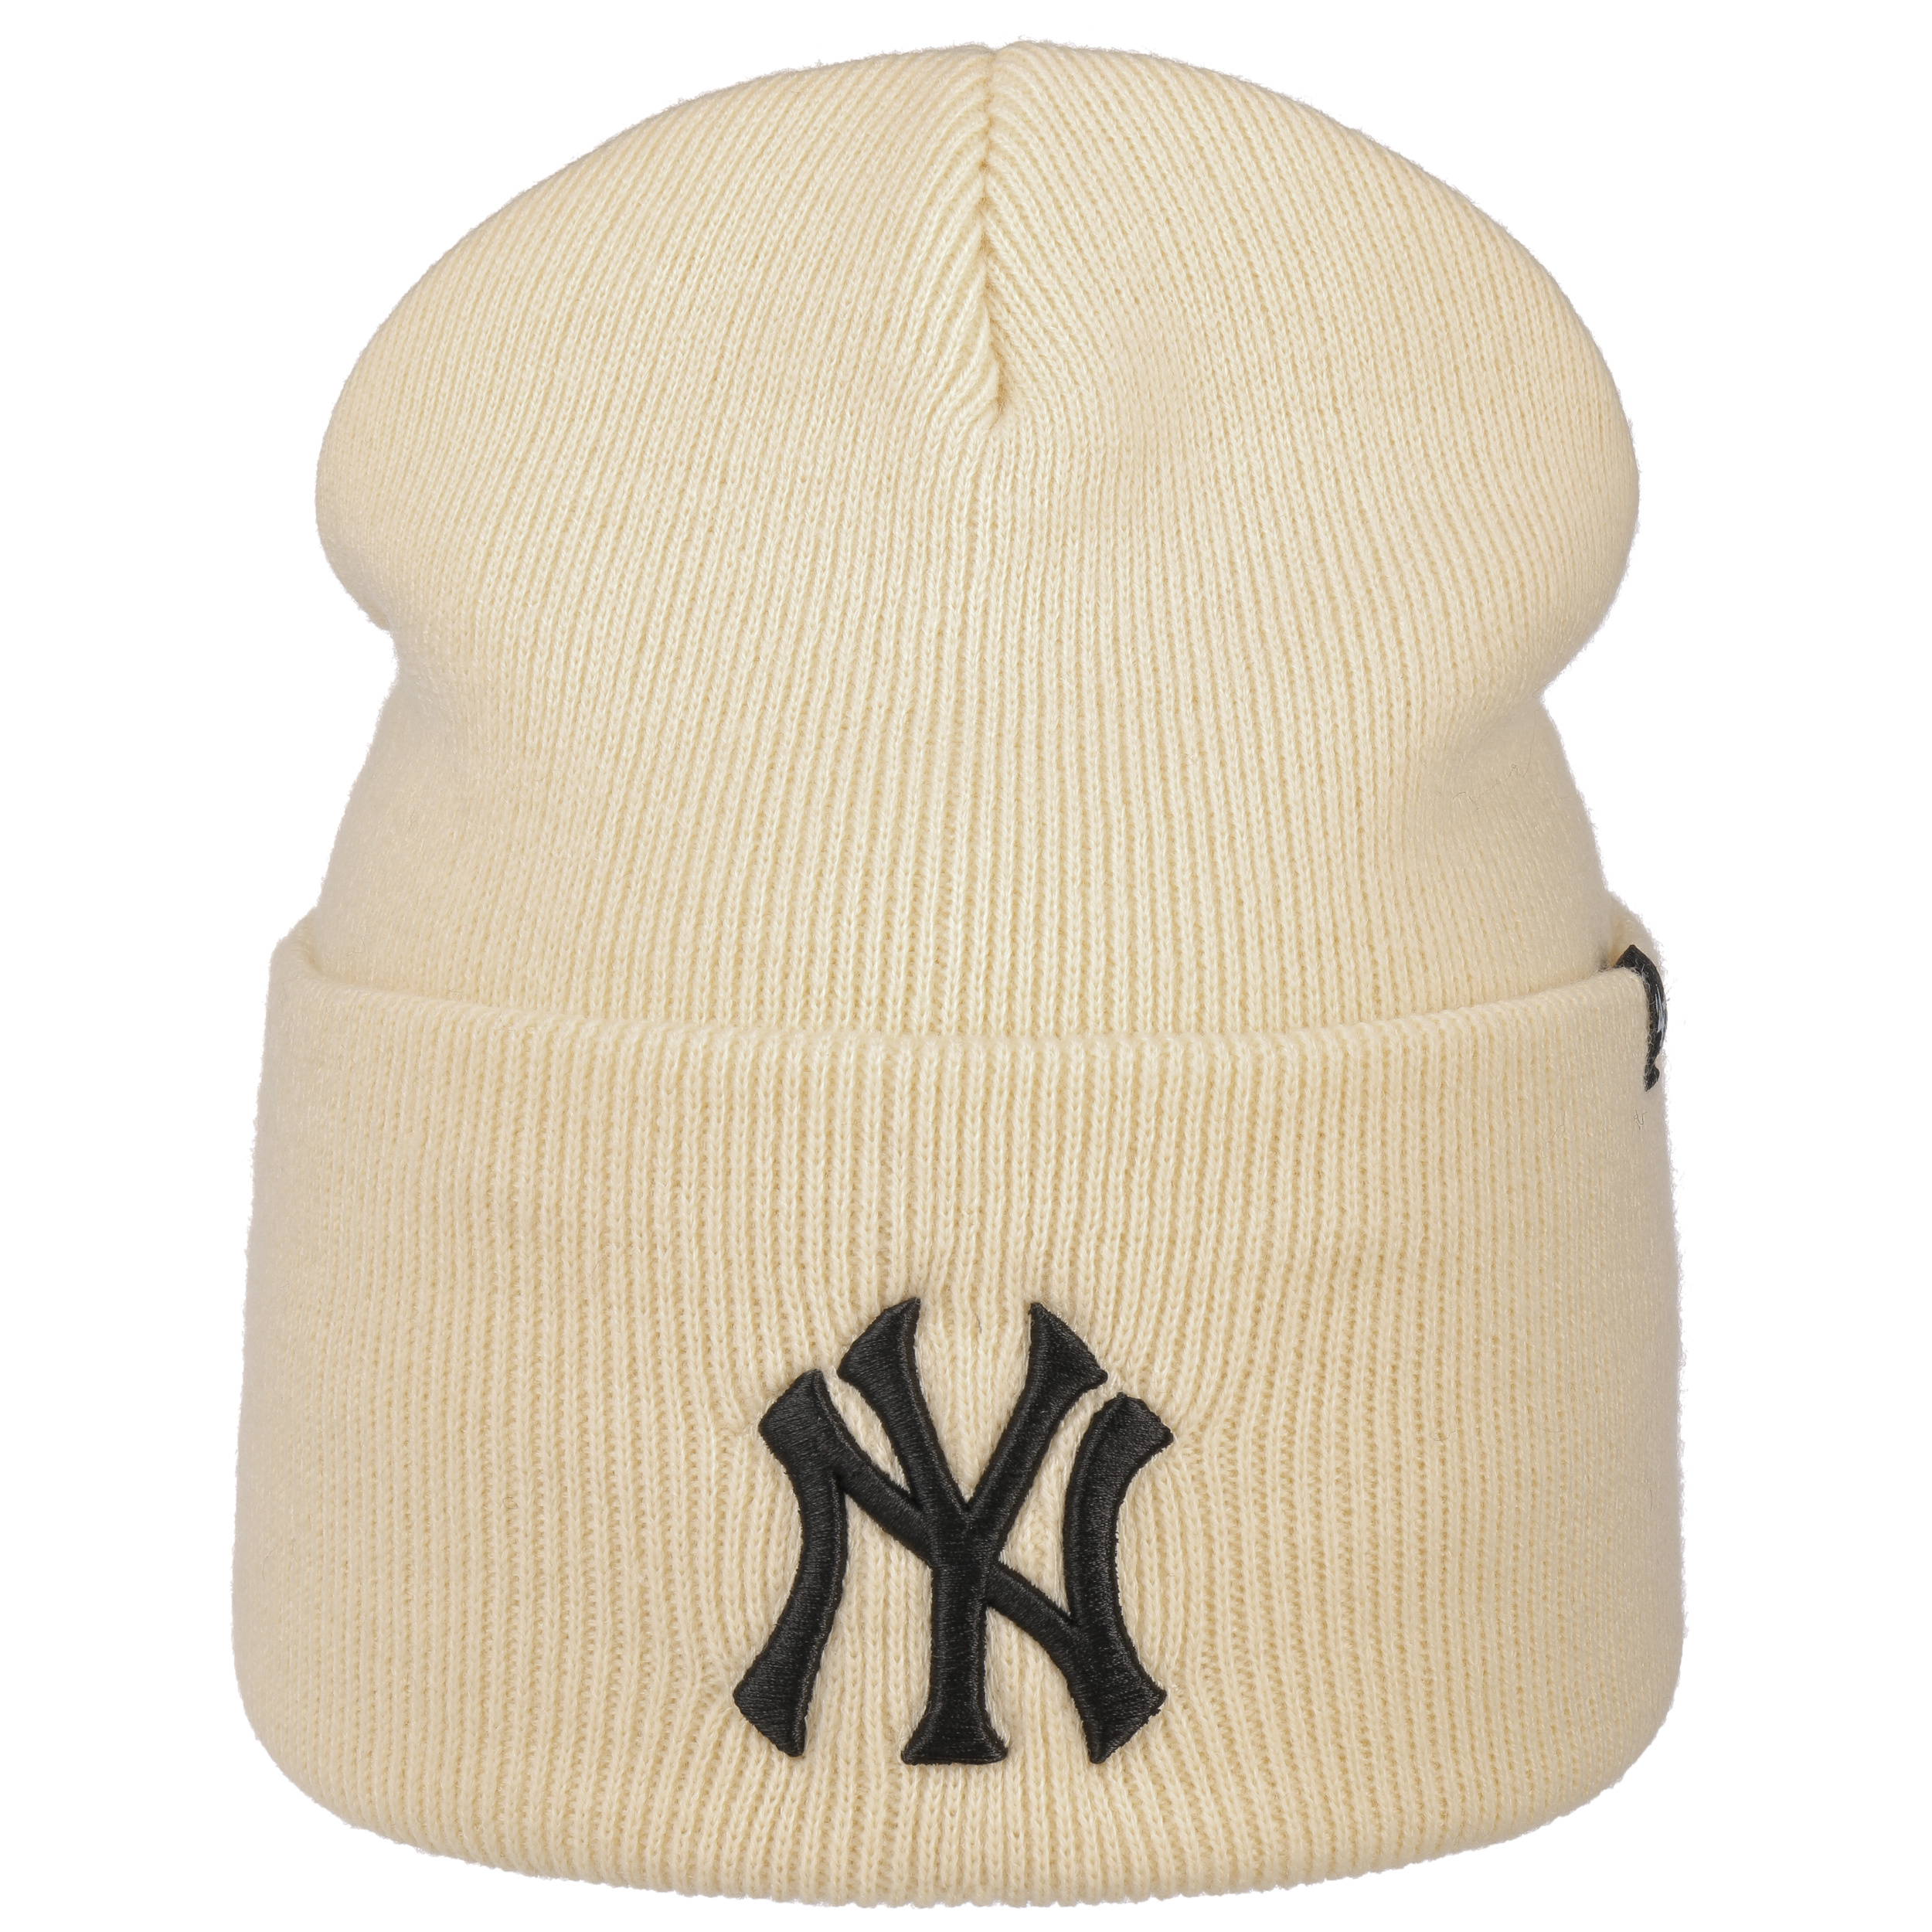 MLB New York Yankees Cuff Knit Beanie with Pom Pom by '47 Brand :  : Clothing & Accessories